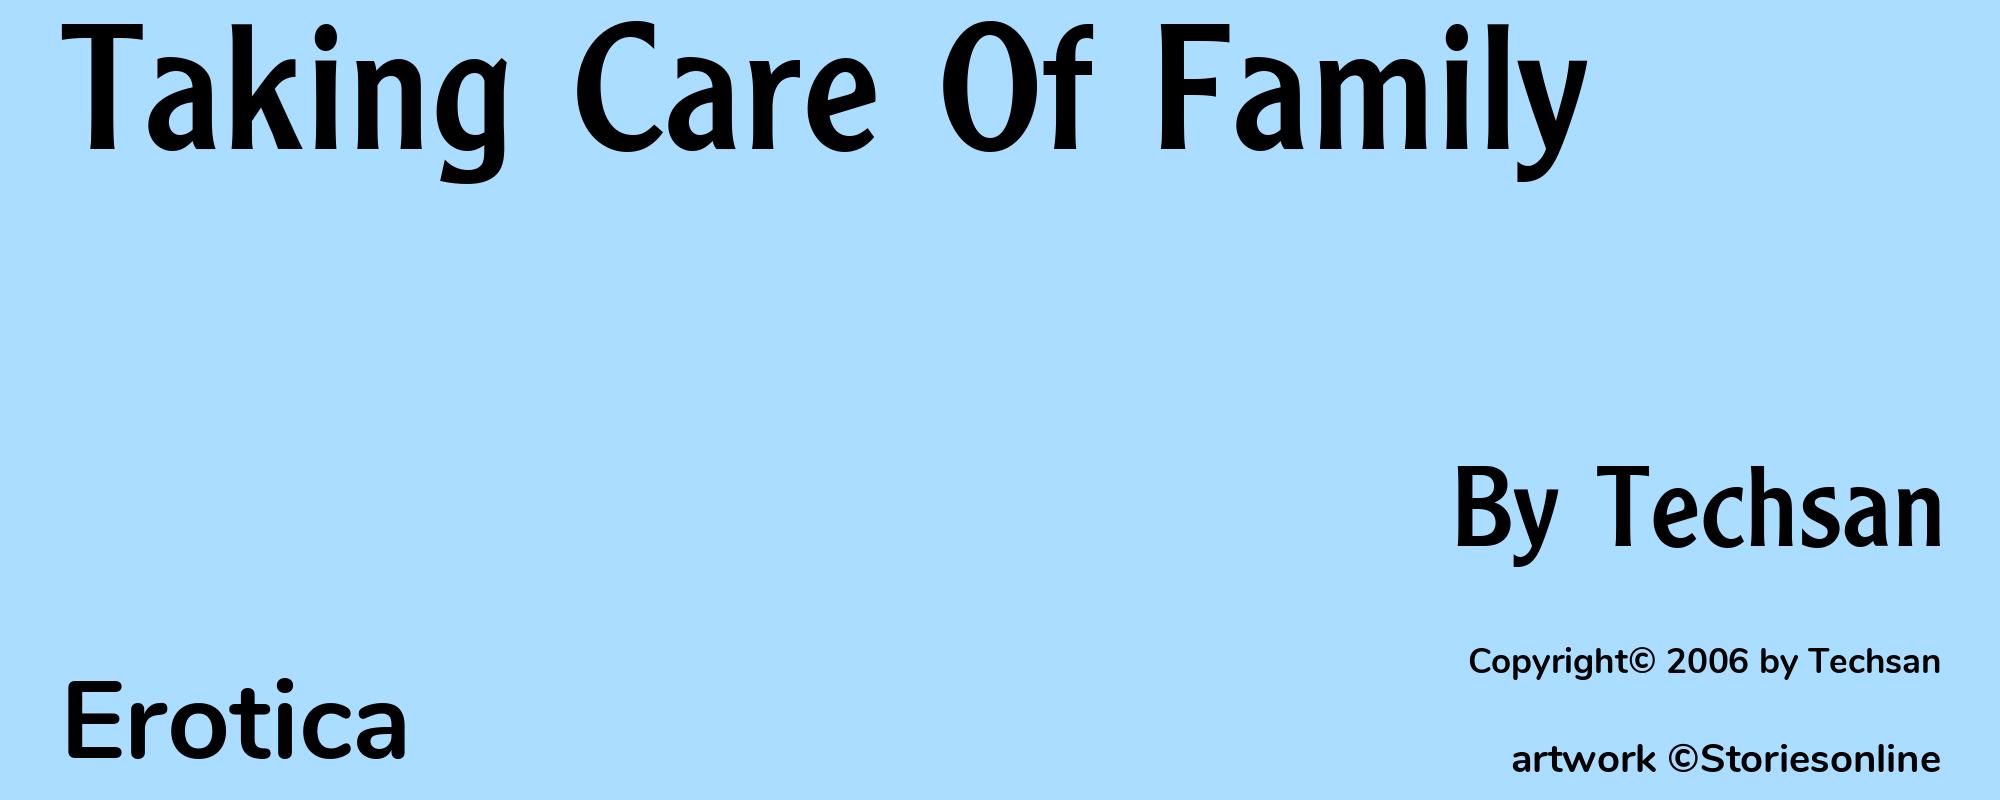 Taking Care Of Family - Cover